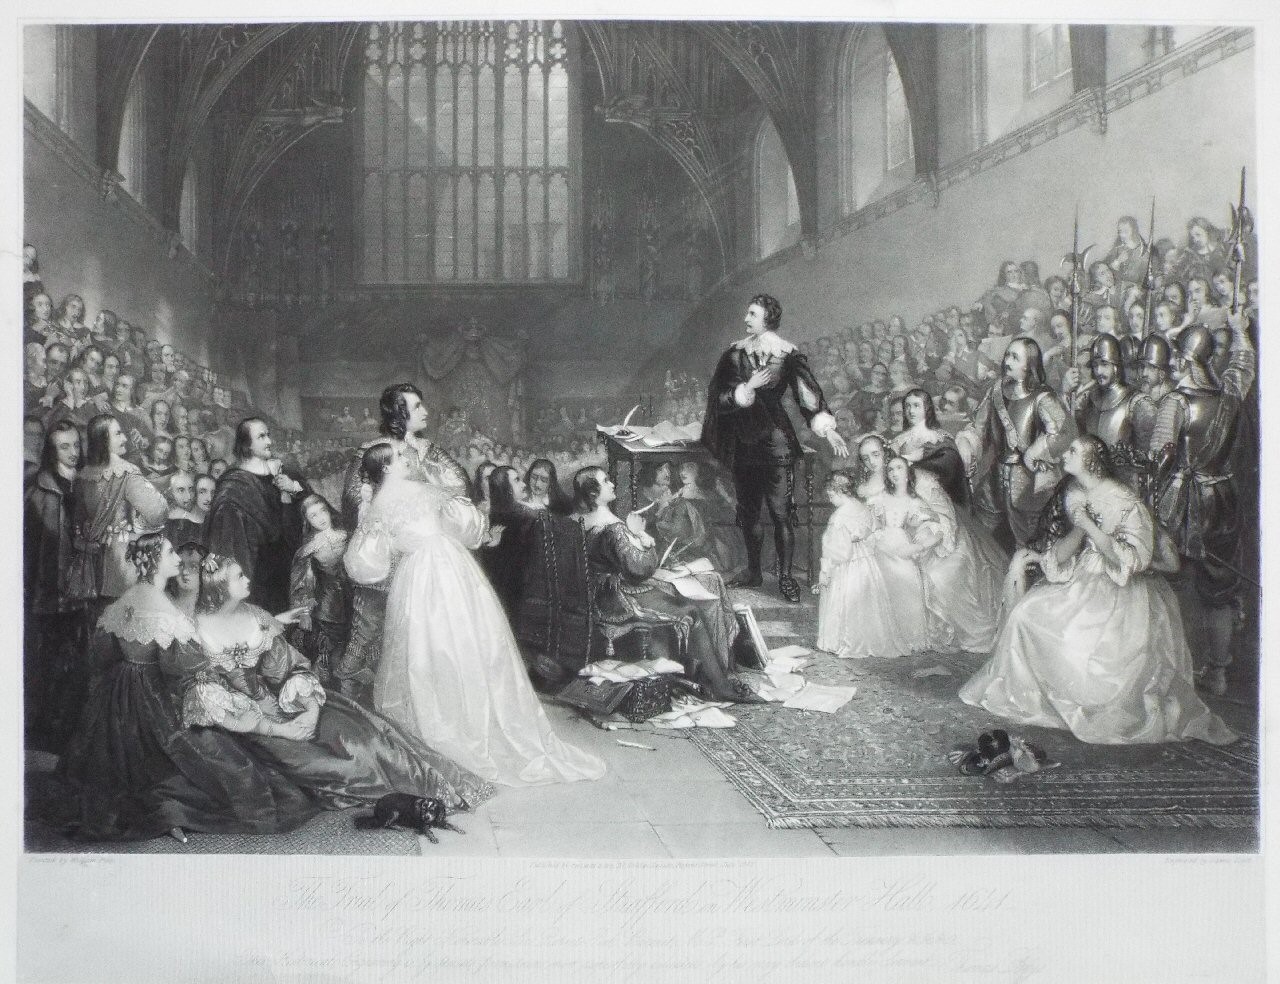 Print - The Trial of Thomas, Earl of Stafford, in Westminster Hall, 1641. - Scott